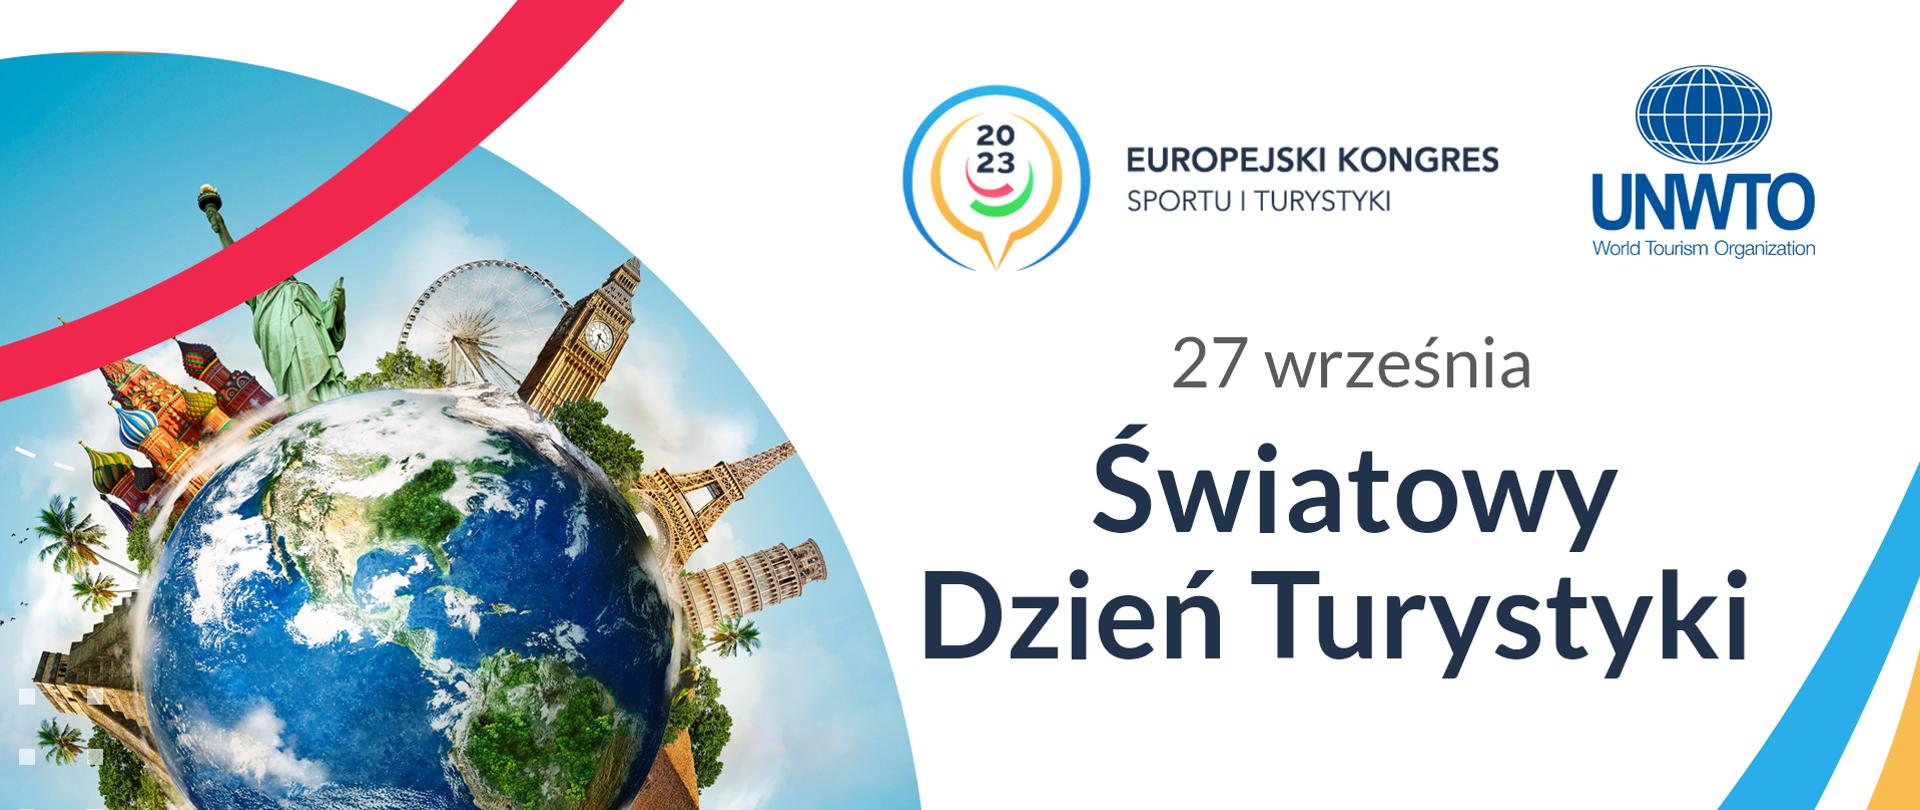 World Tourism Day - September 27th. Promotional banner with World Tourism Organization logo and II European Congress of Sport and Tourism sign.